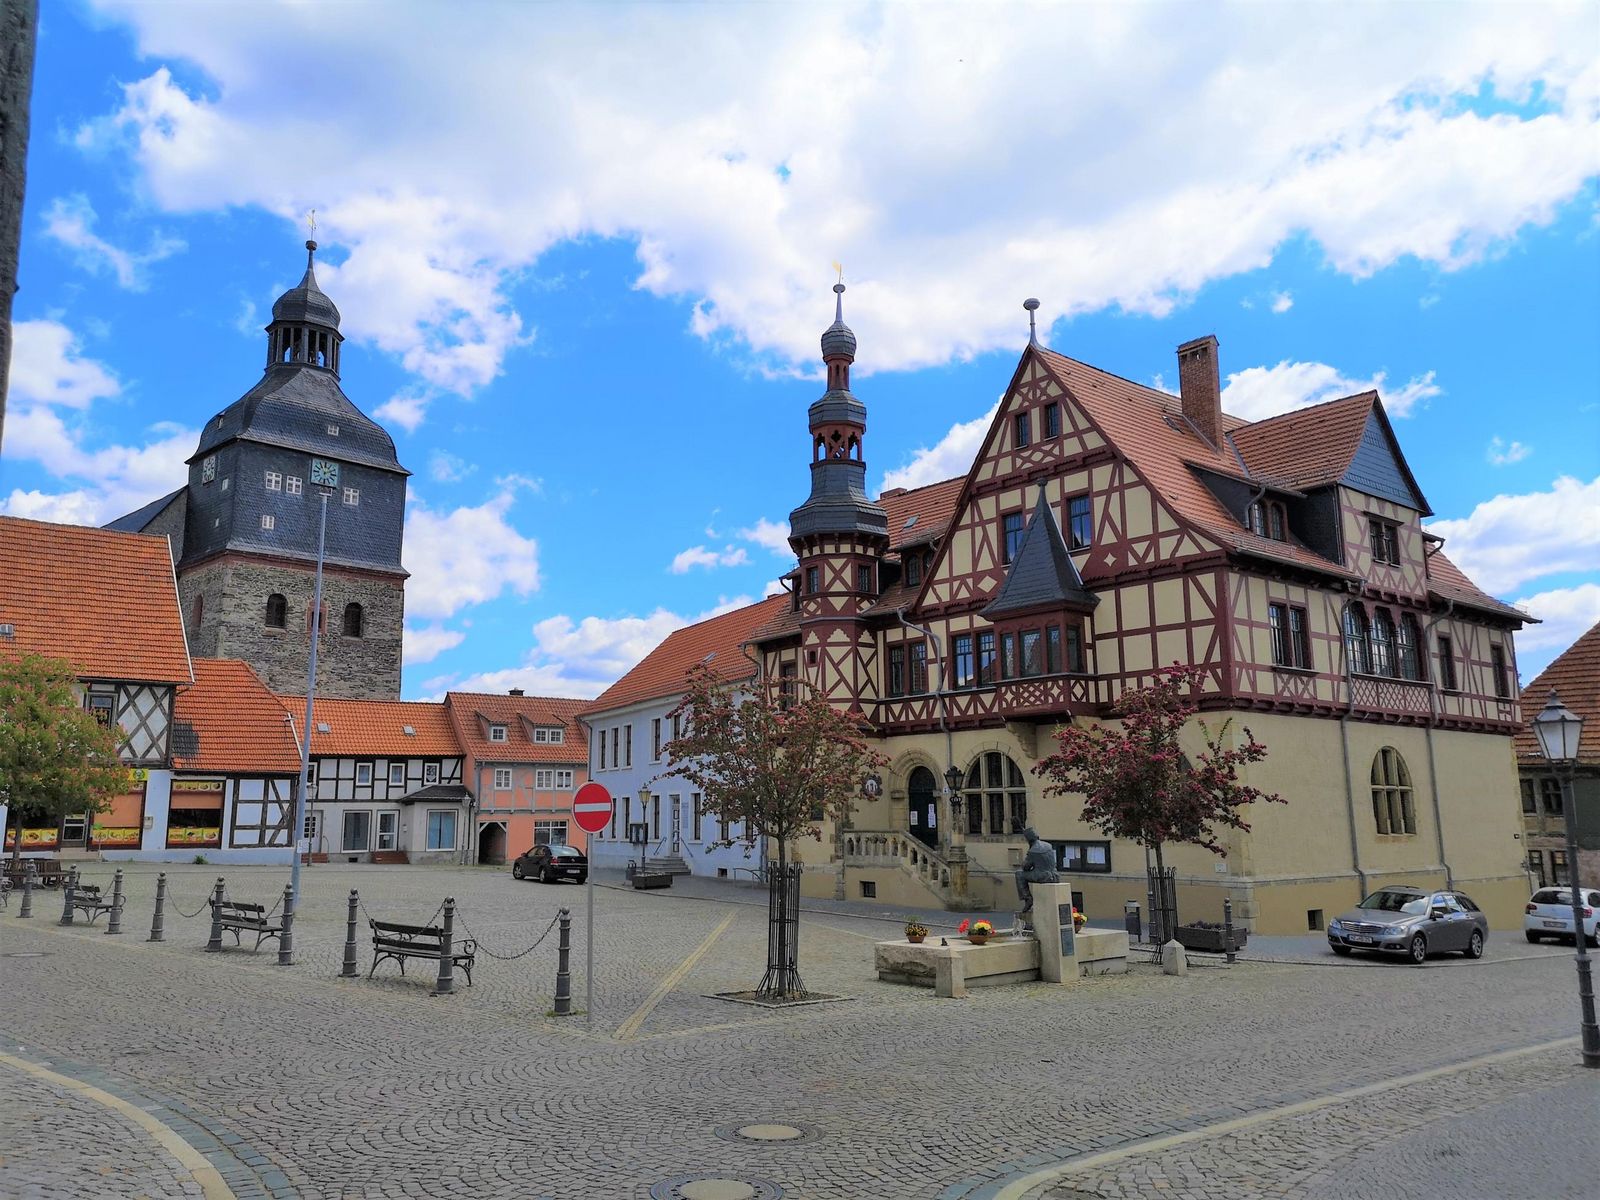 Harzgerode - the centre of the Lower Harz